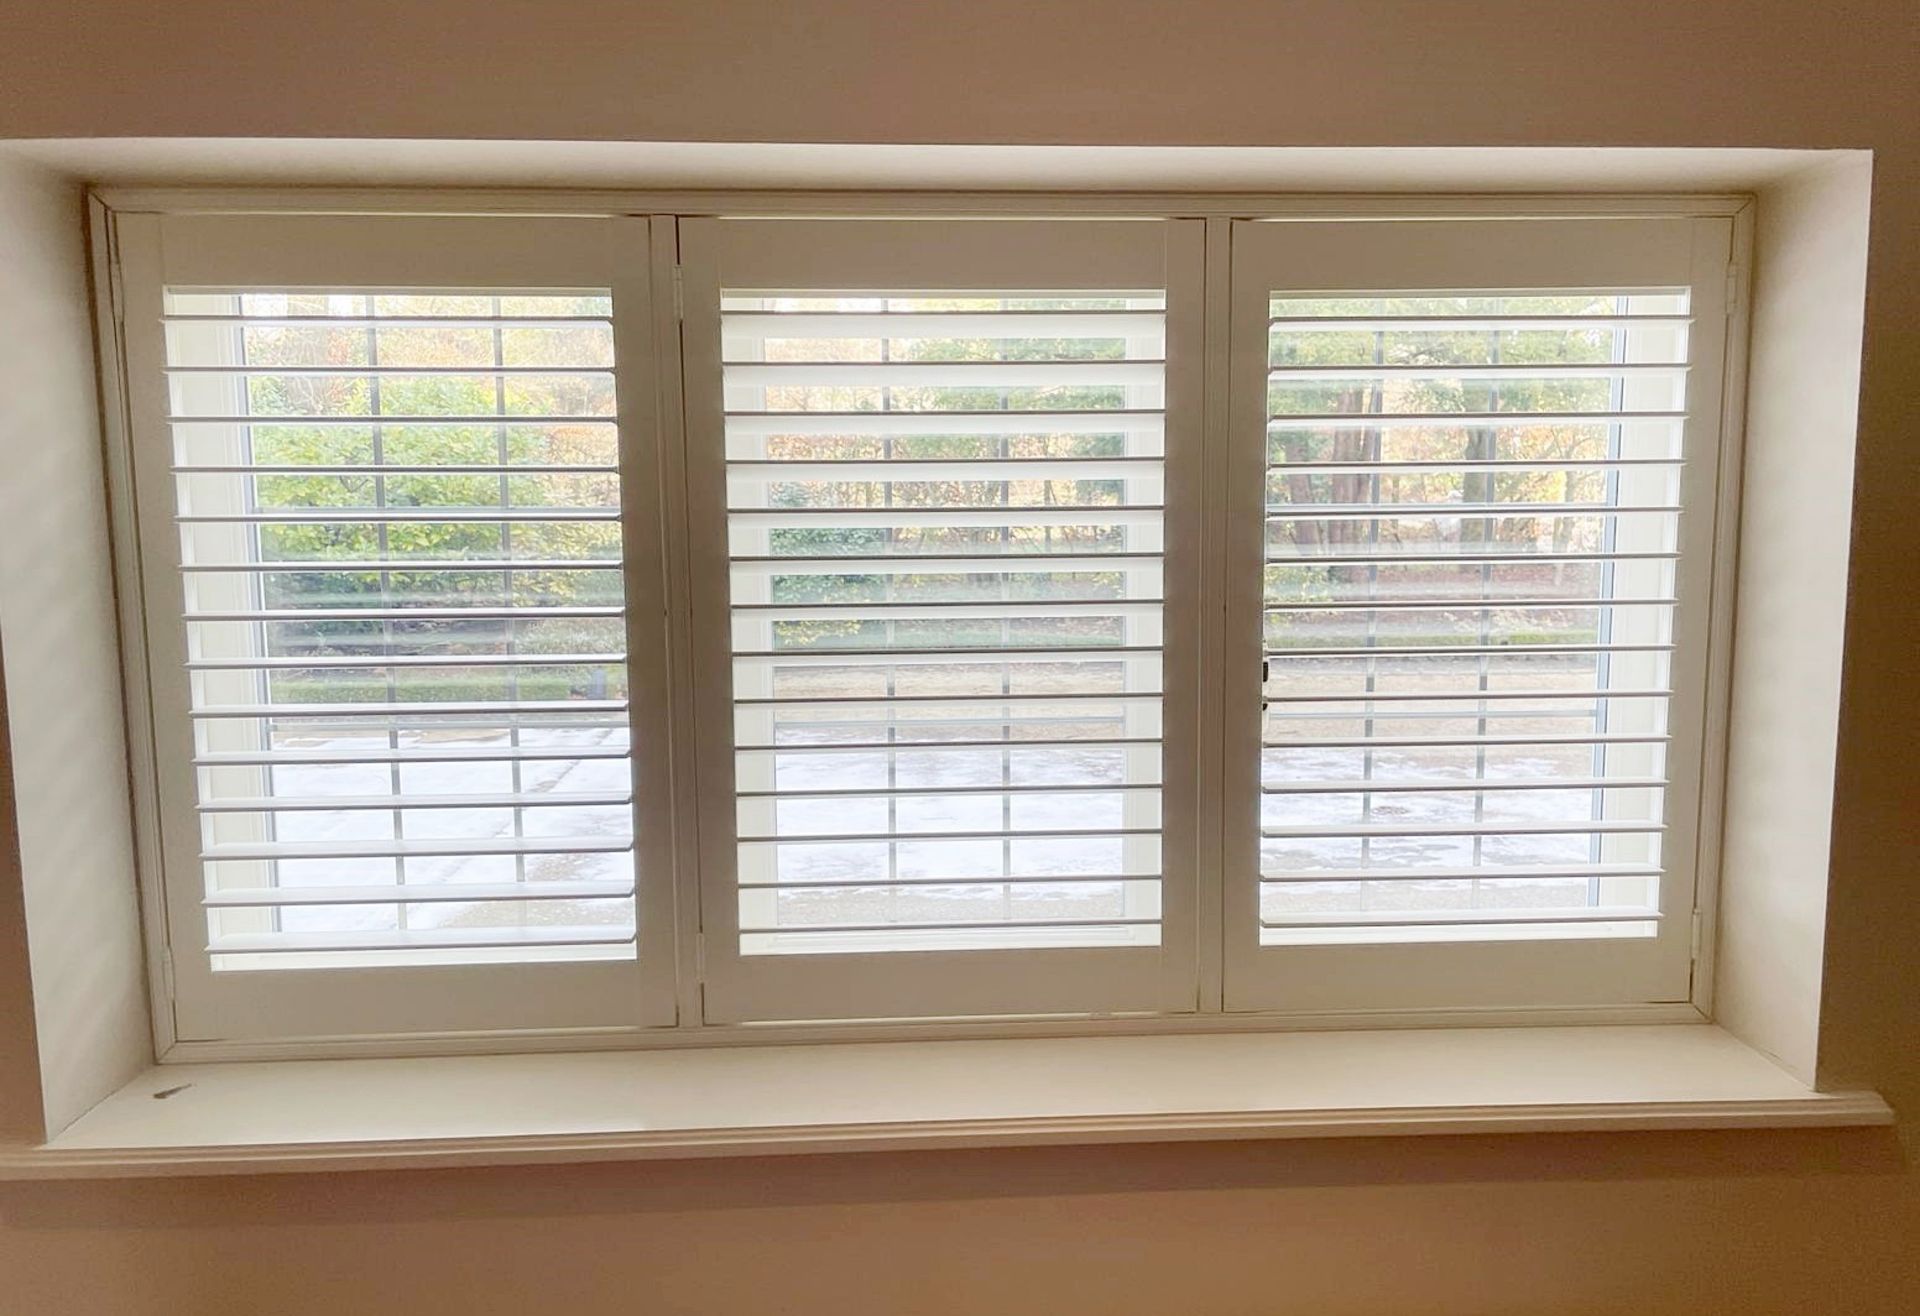 1 x Hardwood Timber Double Glazed Leaded 3-Pane Window Frame fitted with Shutter Blinds - Image 3 of 15